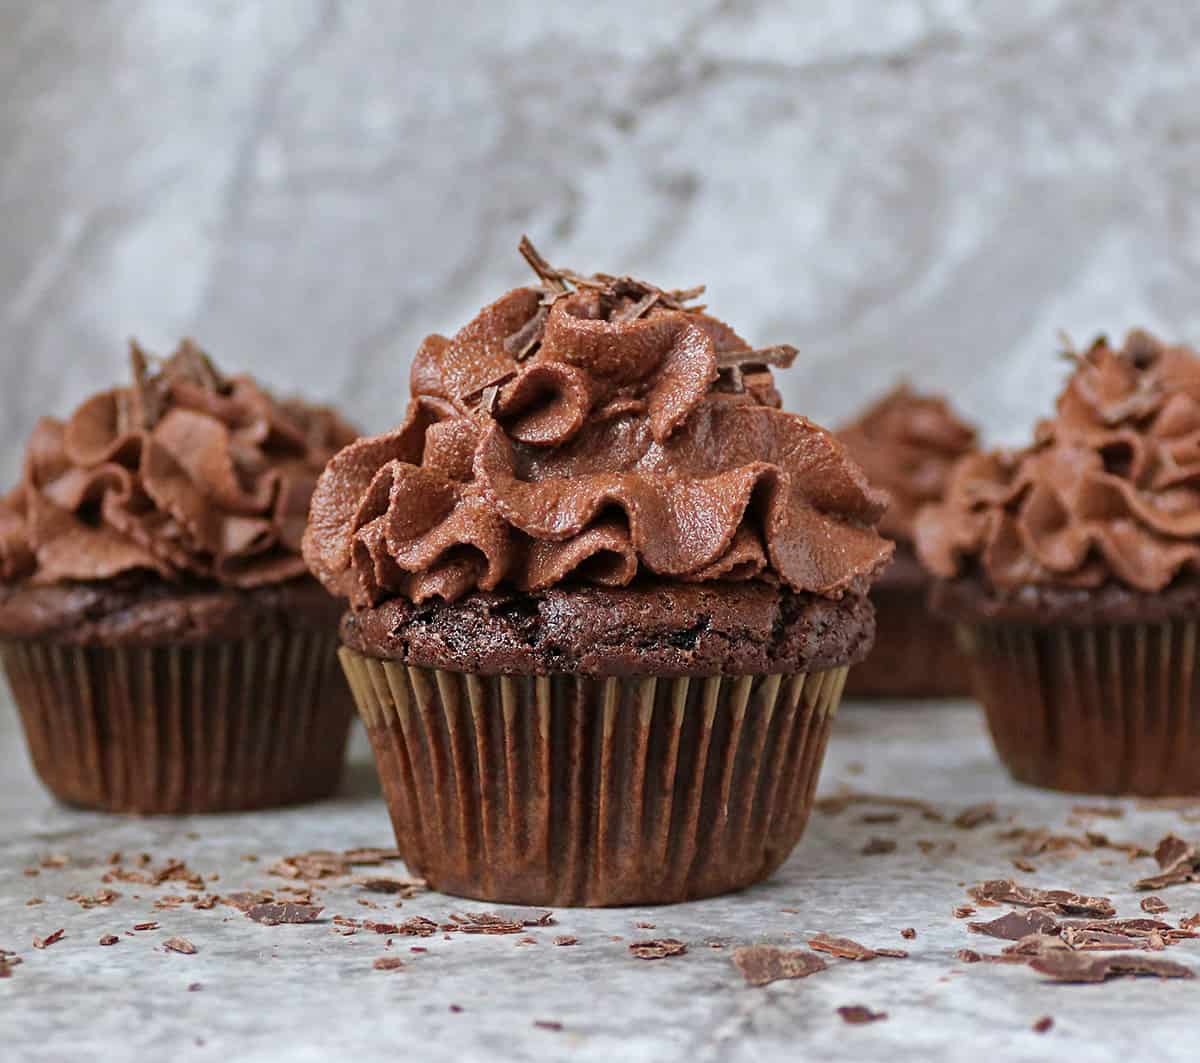 Tasty  Easy Vegan Chocolate Cupcakes without any vinegar, lemon juice, or flax eggs.